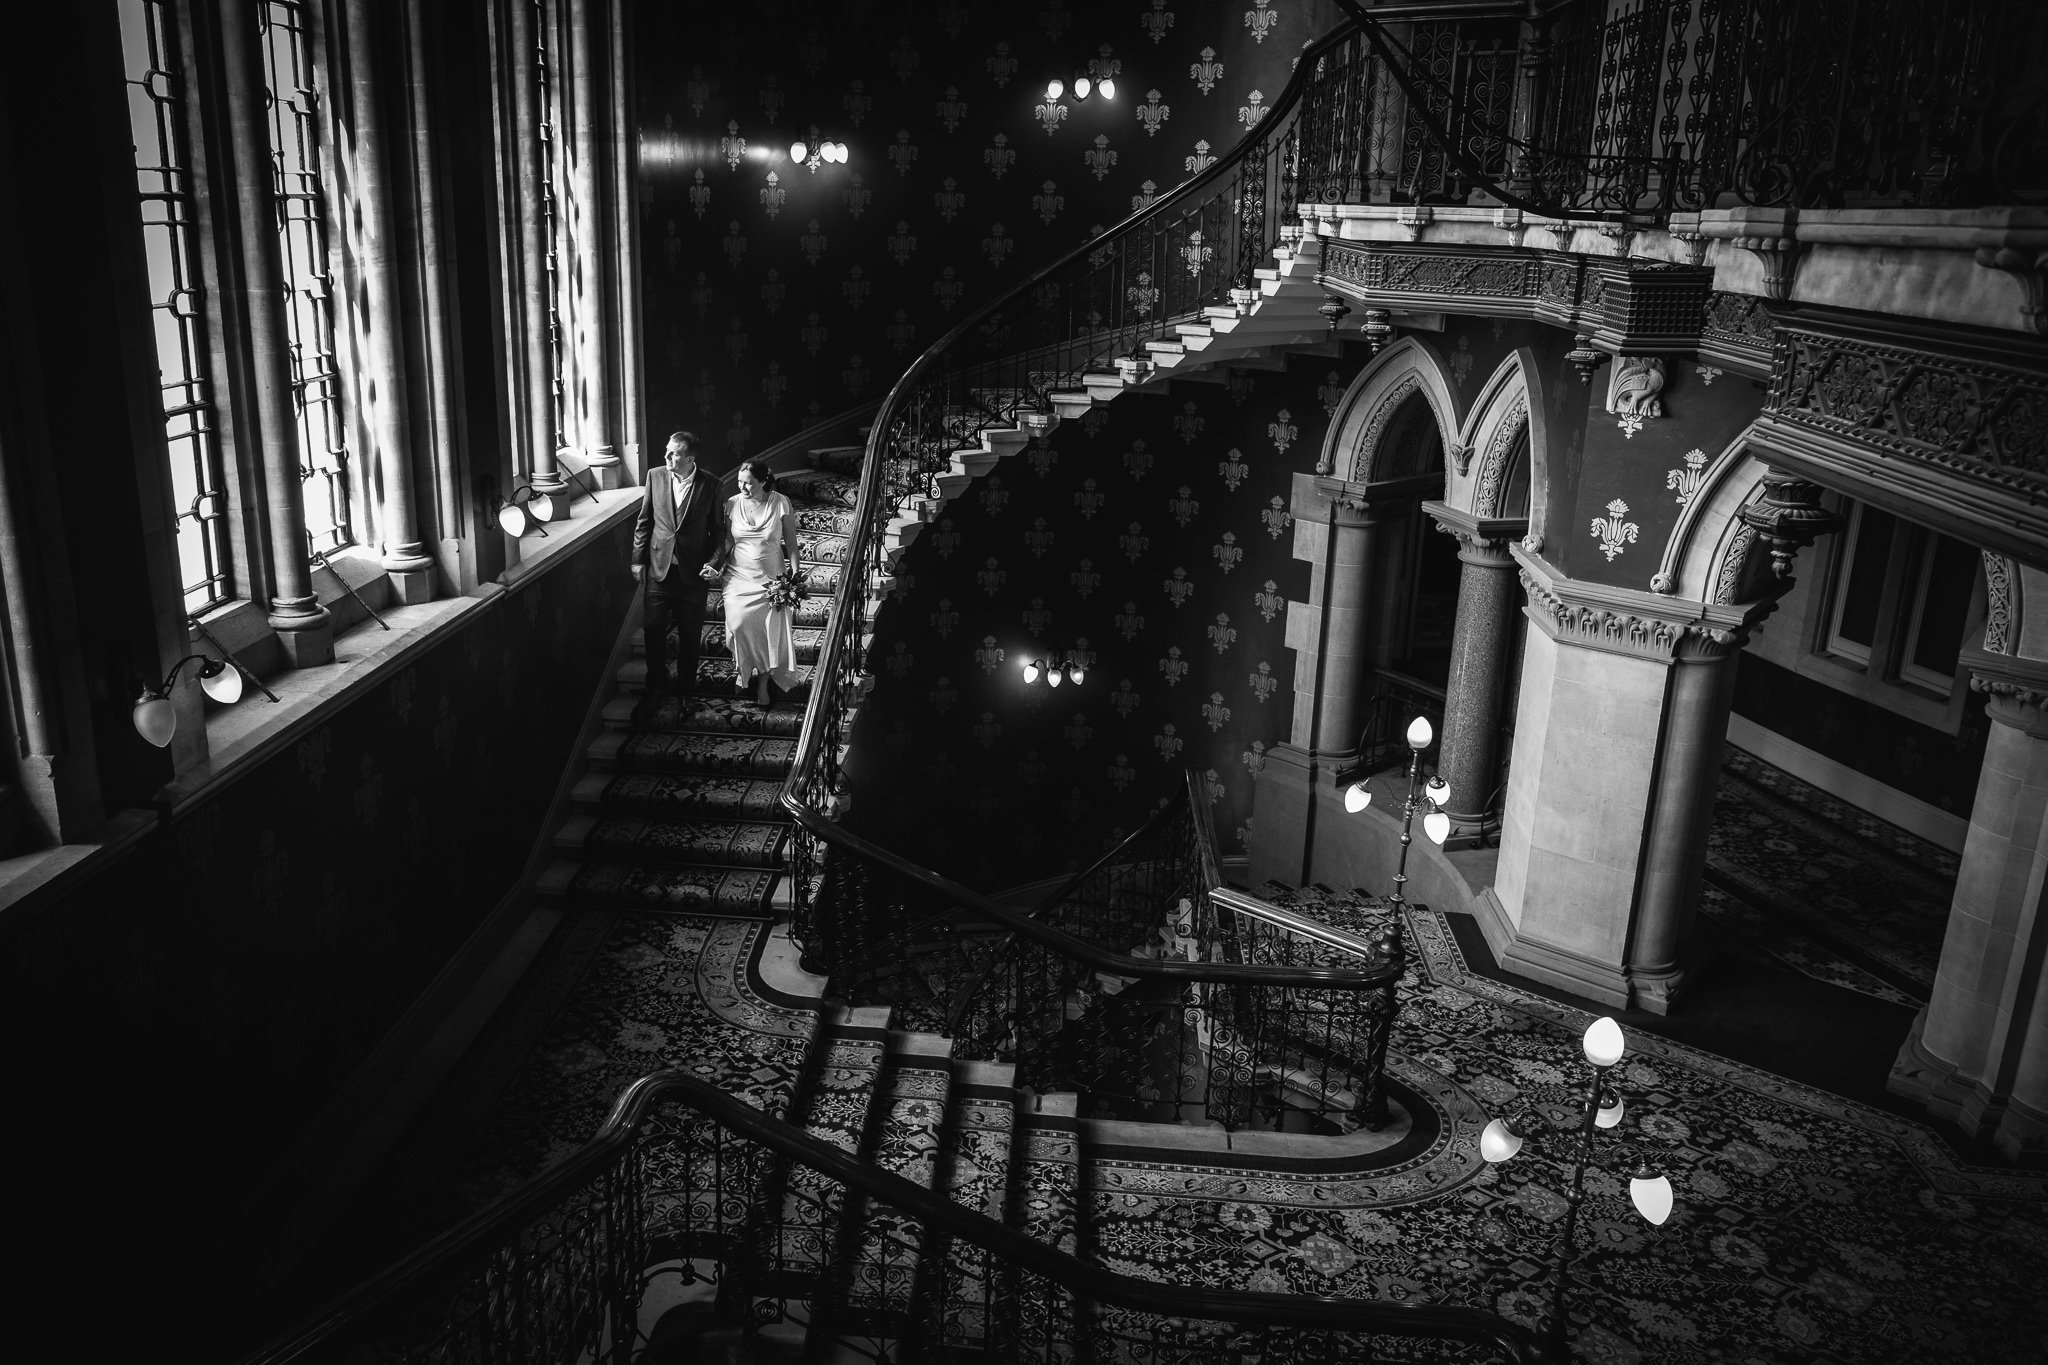  Bride and Groom descend the staircase as light comes in through the window at St. Pancras Renaissance Hotel London 